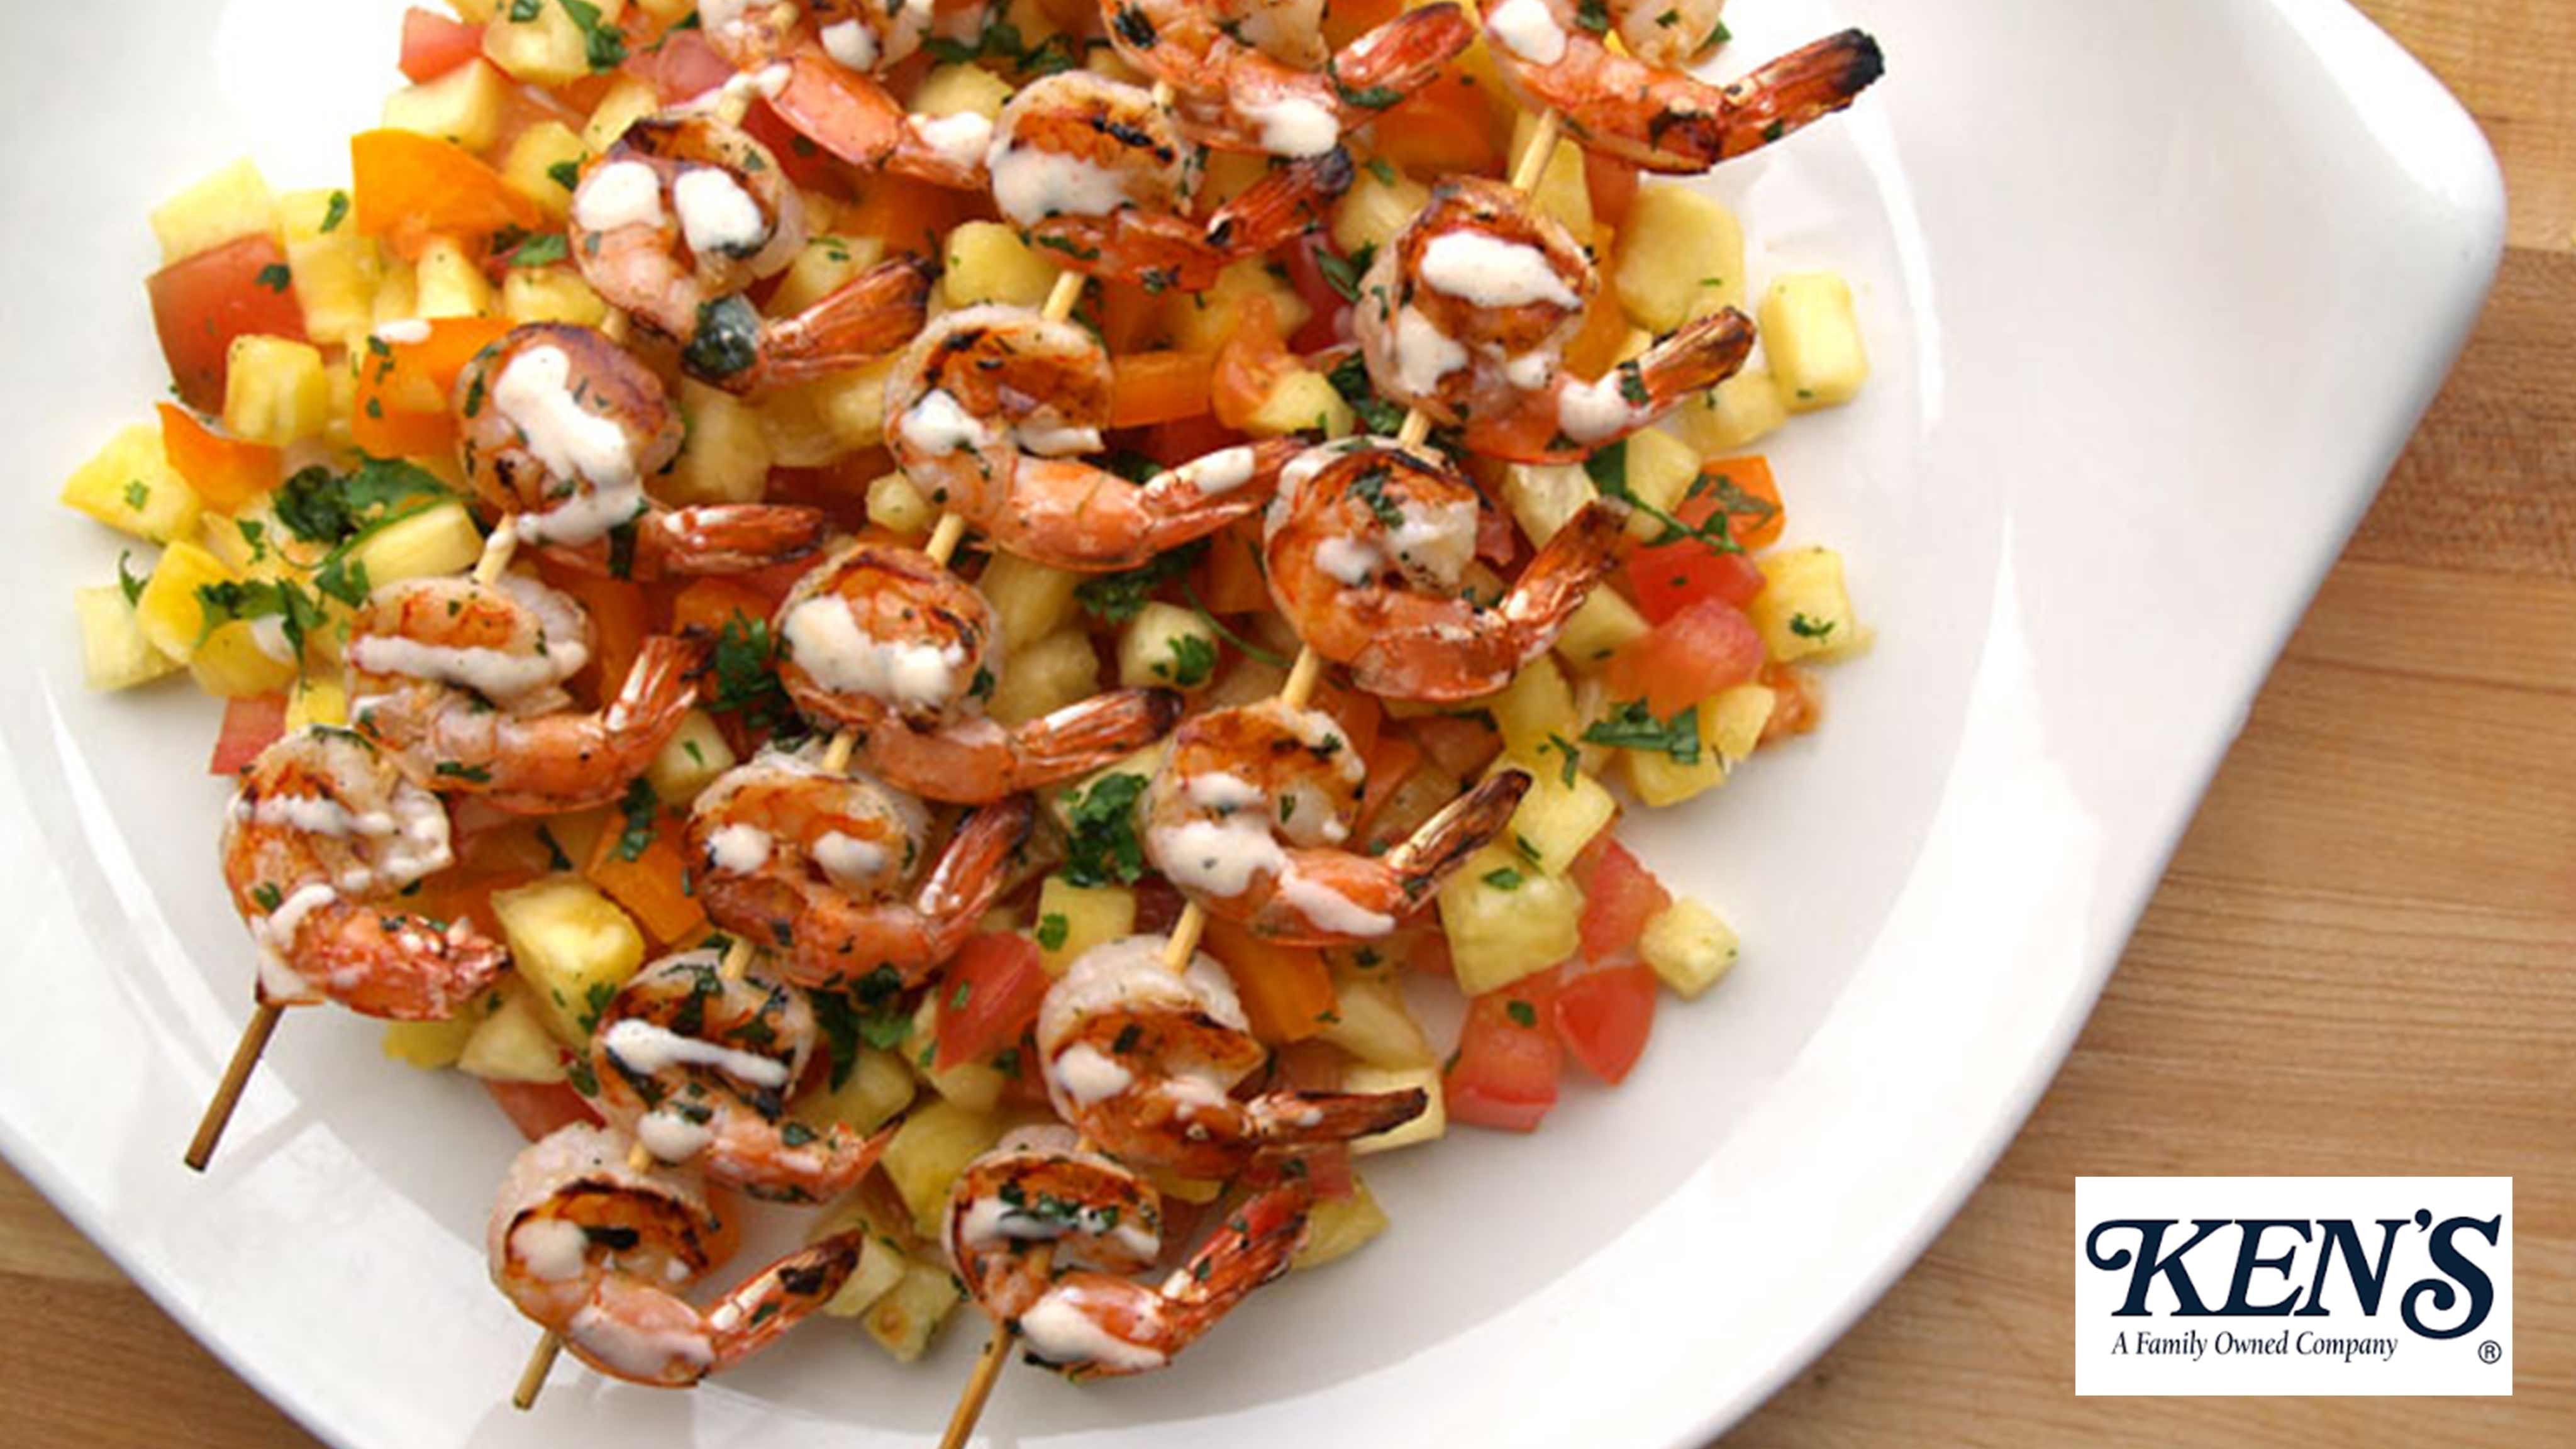 Image for Recipe Grilled Shrimp with Pineapple Salsa